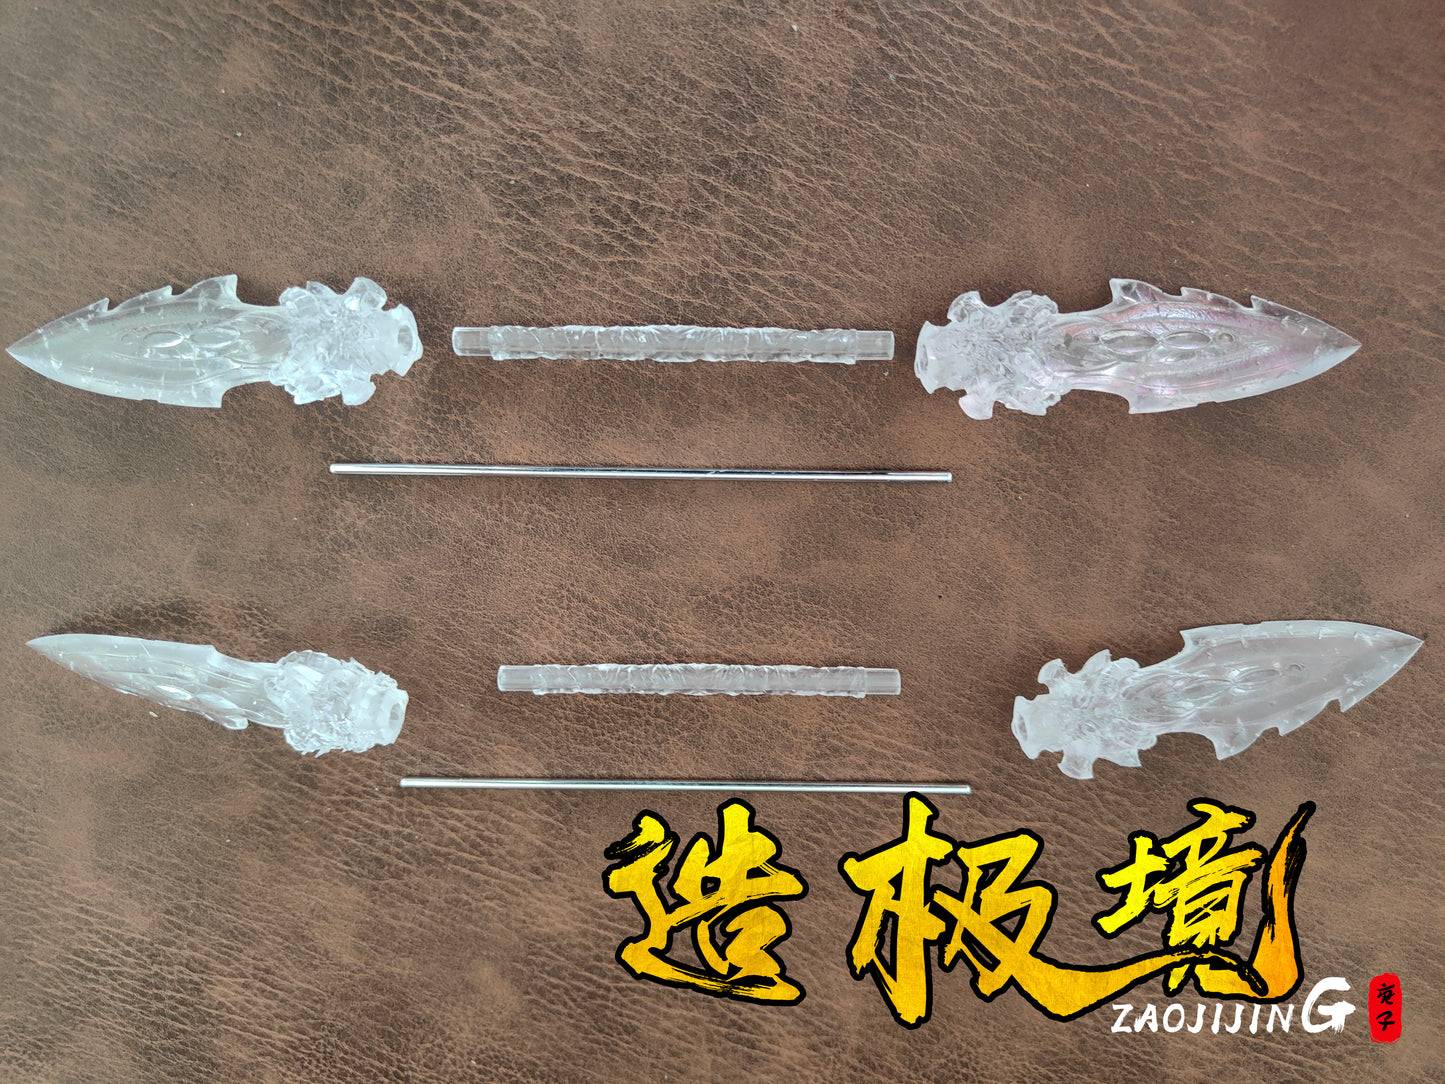 Weapon - Keel double blade